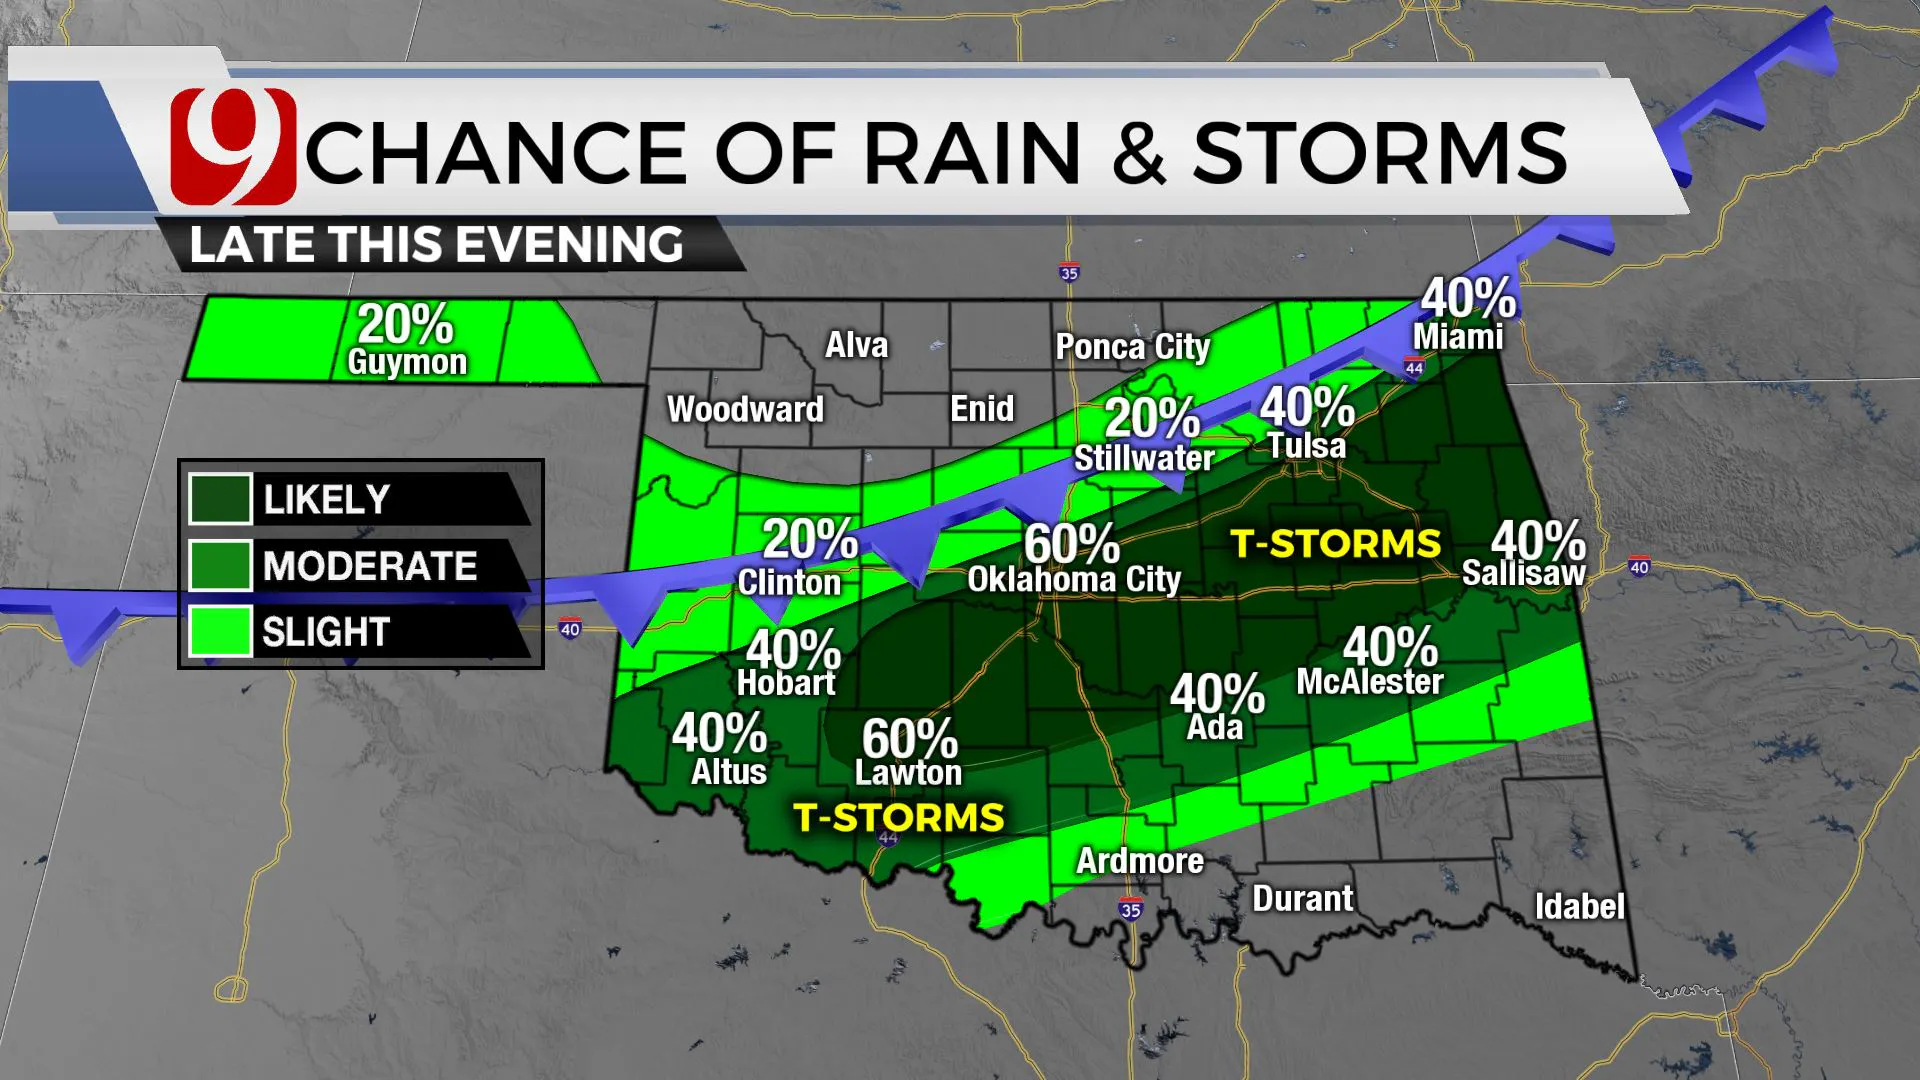 Chances of rain and storms for Monday evening.